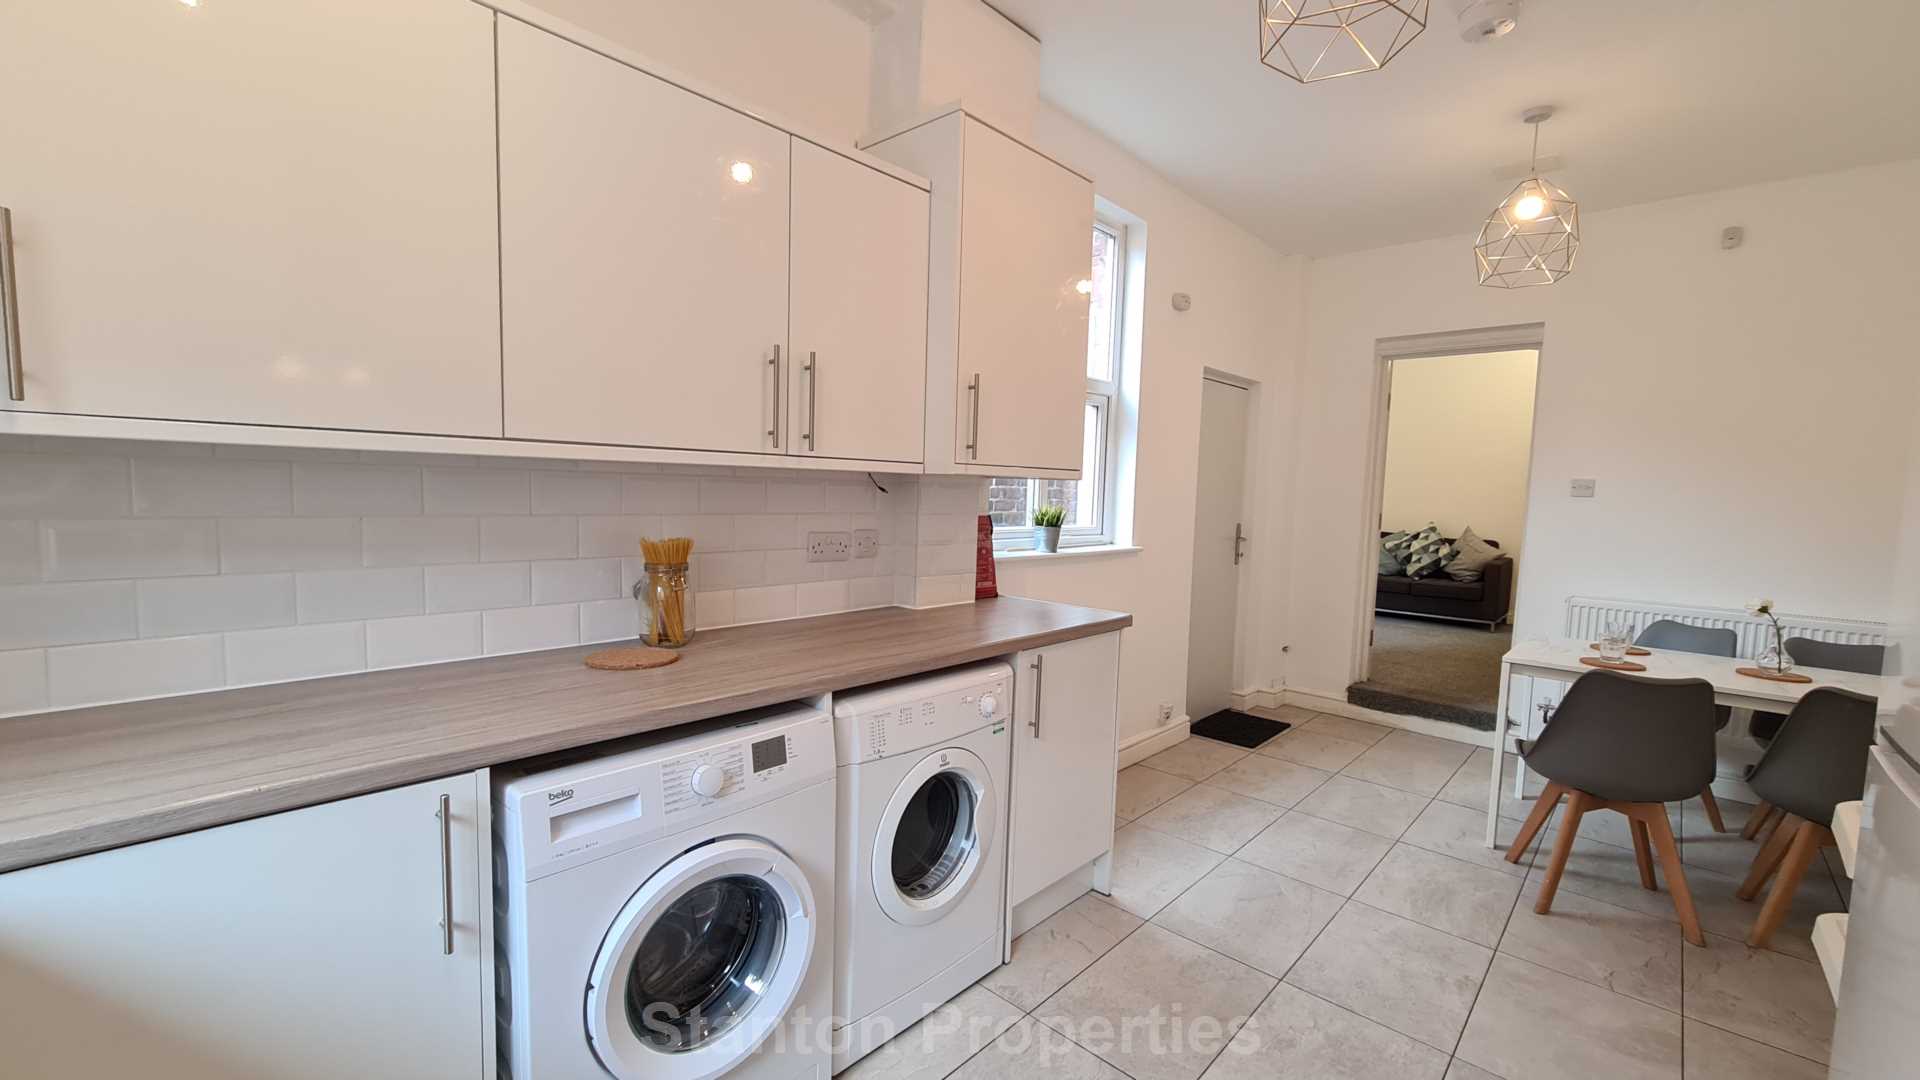 £136 pppw, See Video Tour, Furness Road, Fallowfield, Image 5